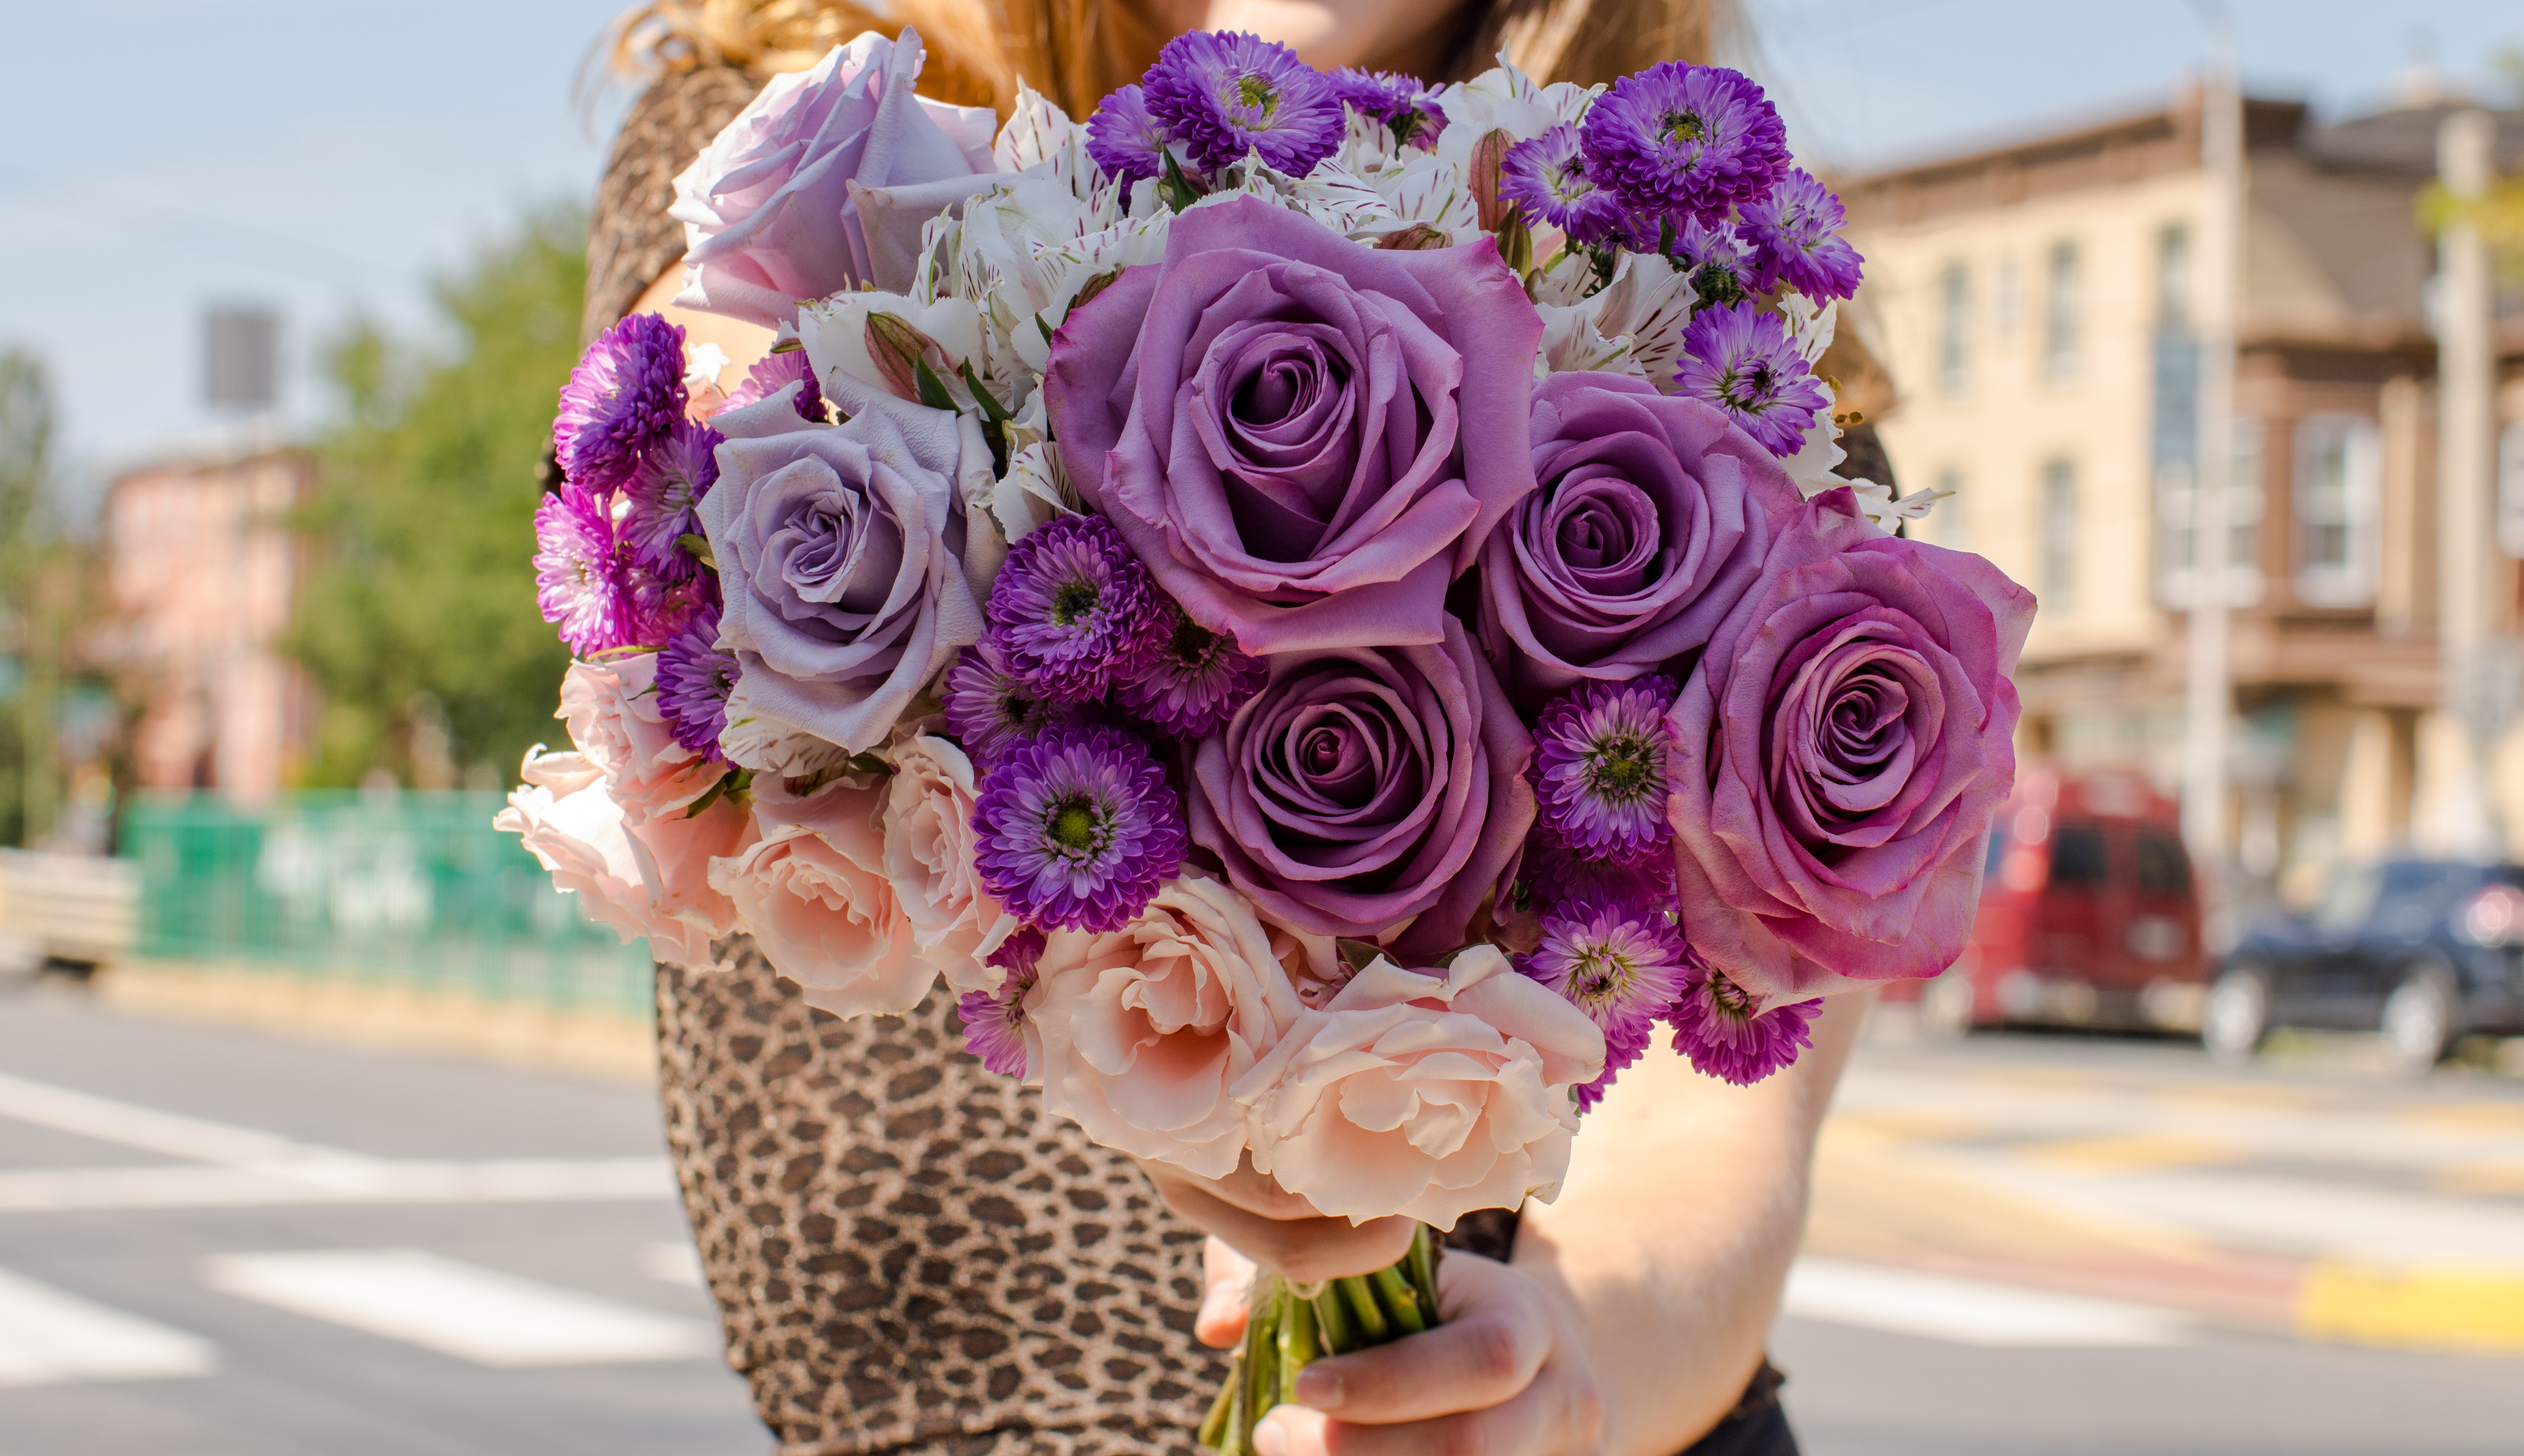 Close up of floral bouquet containing purple asters